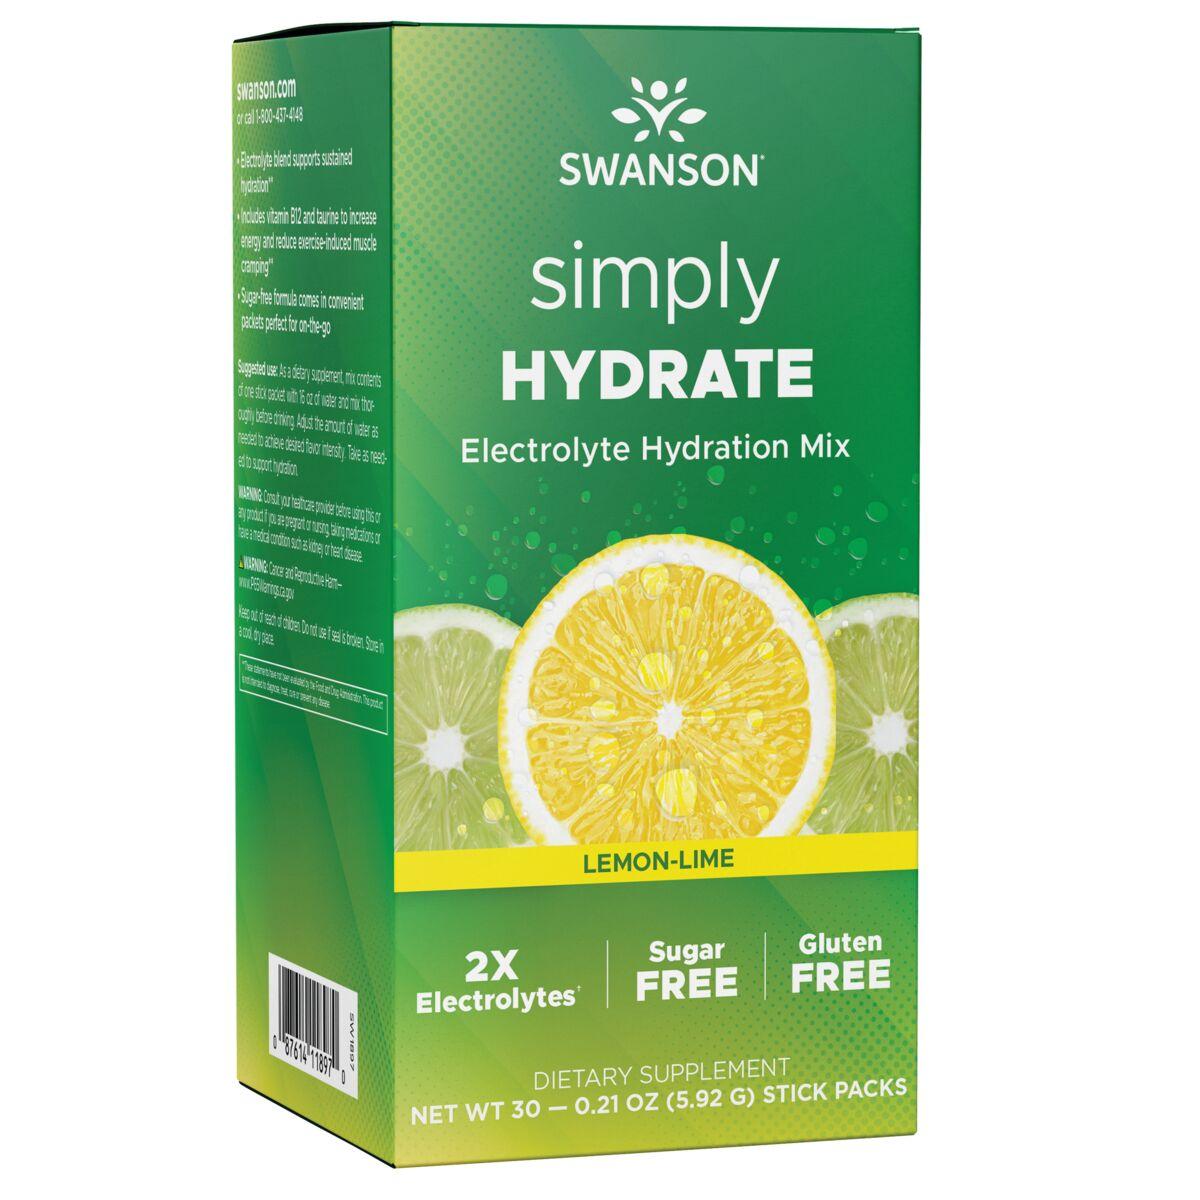 Swanson Premium simply Hydrate Electrolyte Hydration Mix - Lemon-Lime Vitamin | 30 Packets